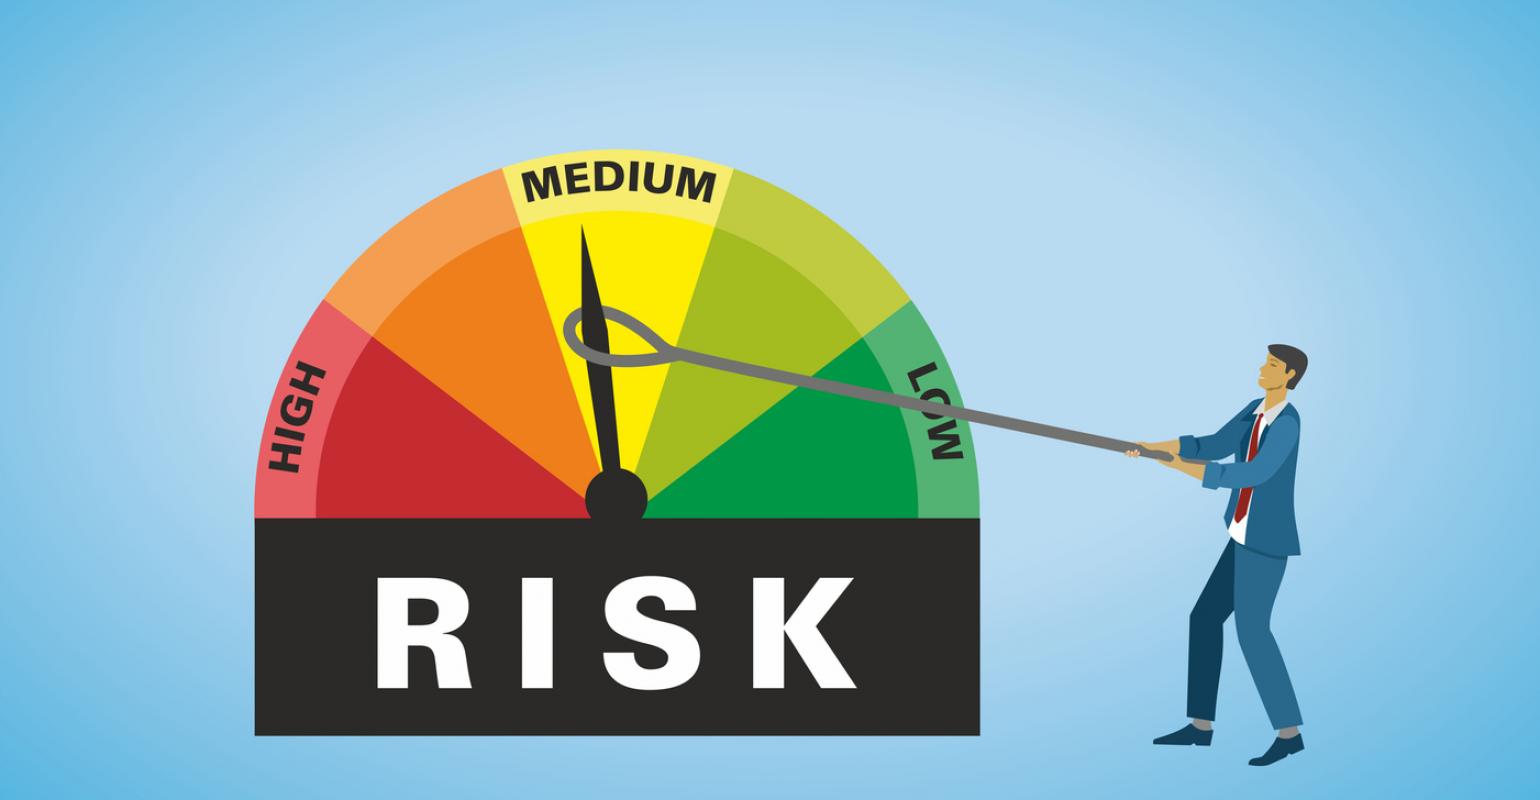 Toolbox - Identifying risks in the field